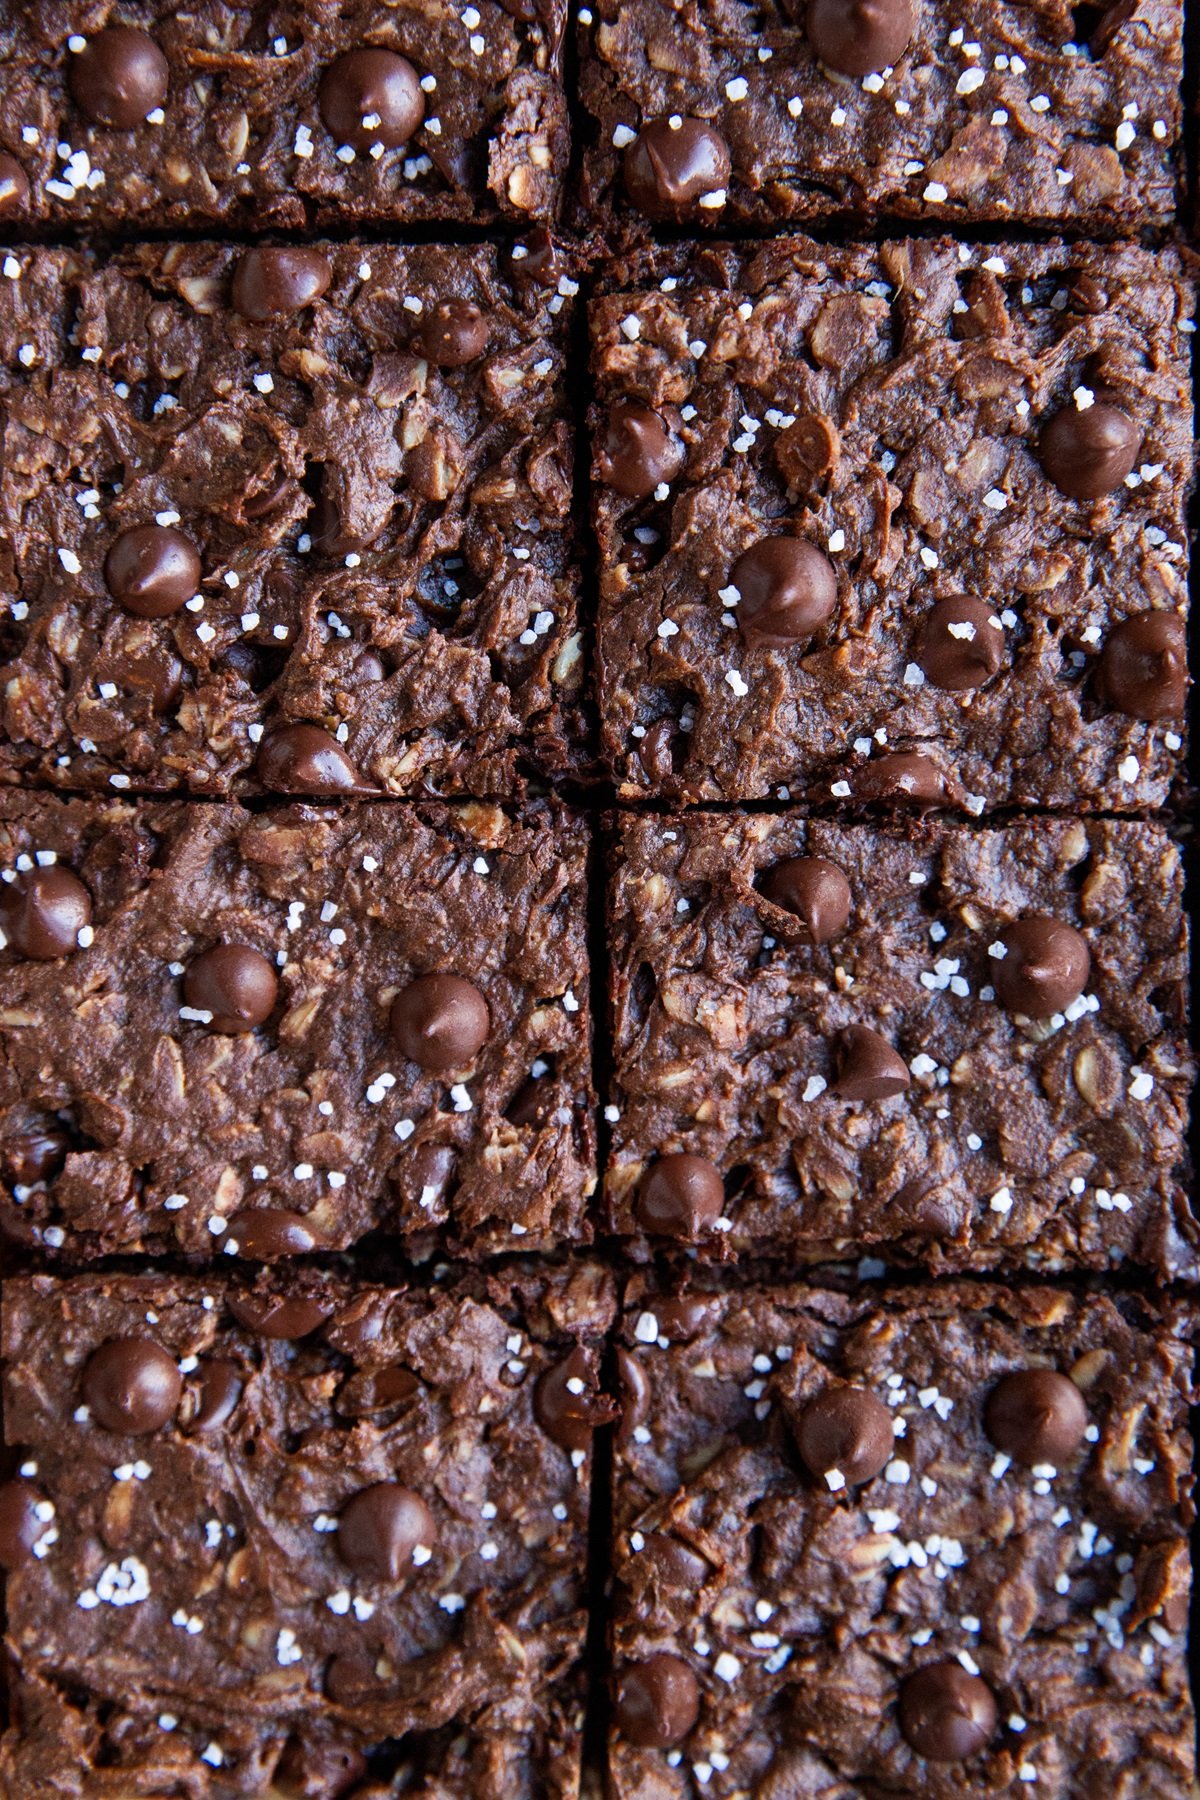 Double chocolate peanut butter oatmeal cookie bars cut into squares.